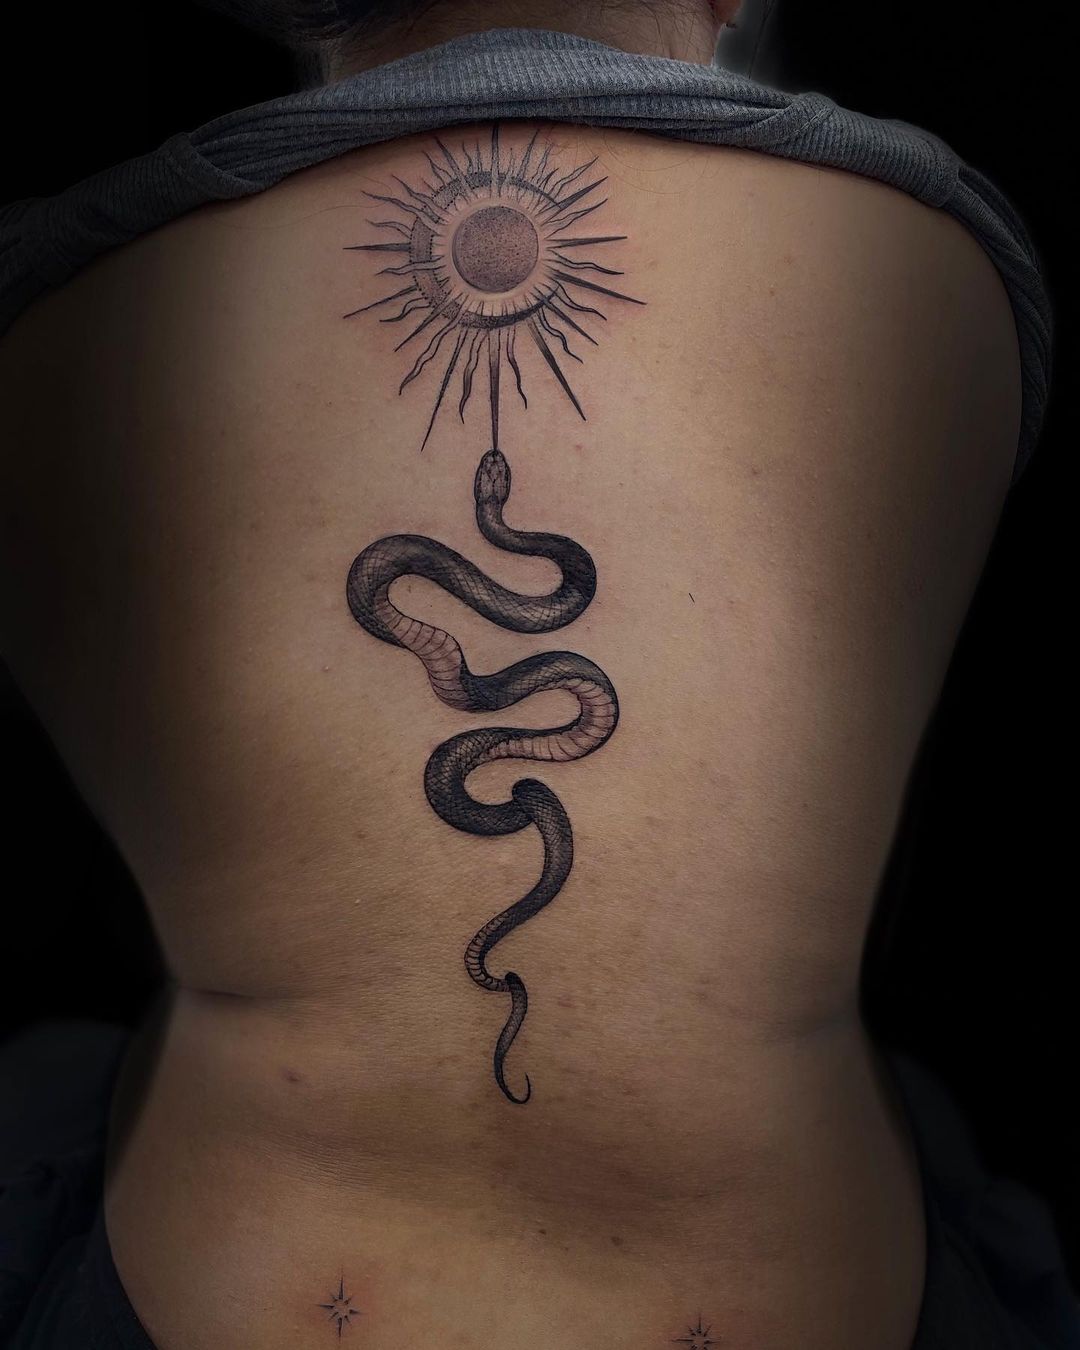 How Much Is a Spine Tattoo